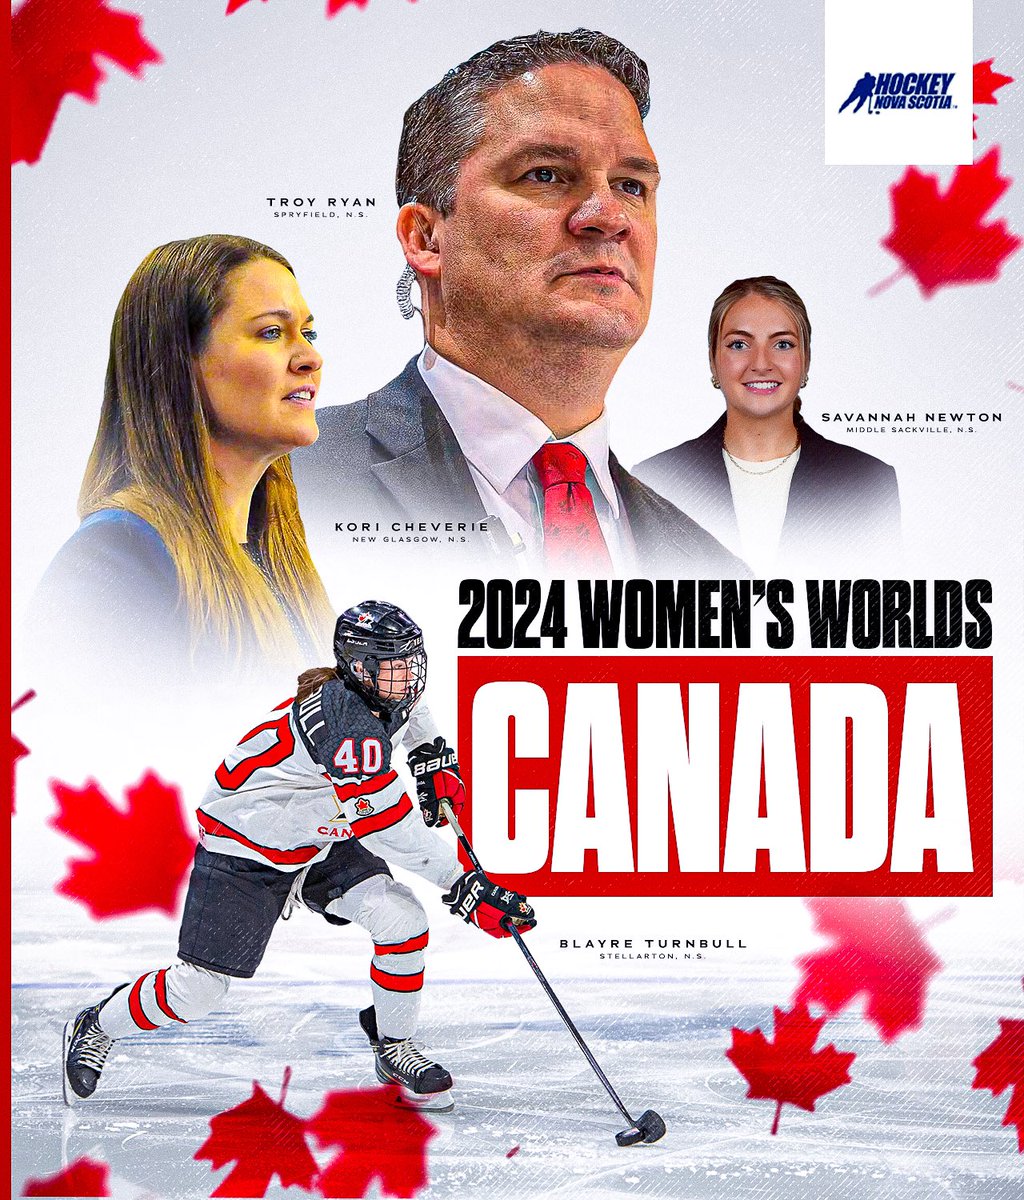 REPRESENTING AT WORLDS 🌎🏒 Team Canada hits the ice this week at the 2024 IIHF Women’s World Championship which runs from April 3-14 in Utica, N.Y. 🇨🇦 Stellarton's Blayre Turnbull will lead the way for the national team on the ice, while Spryfield's Troy Ryan and New Glasgow's…